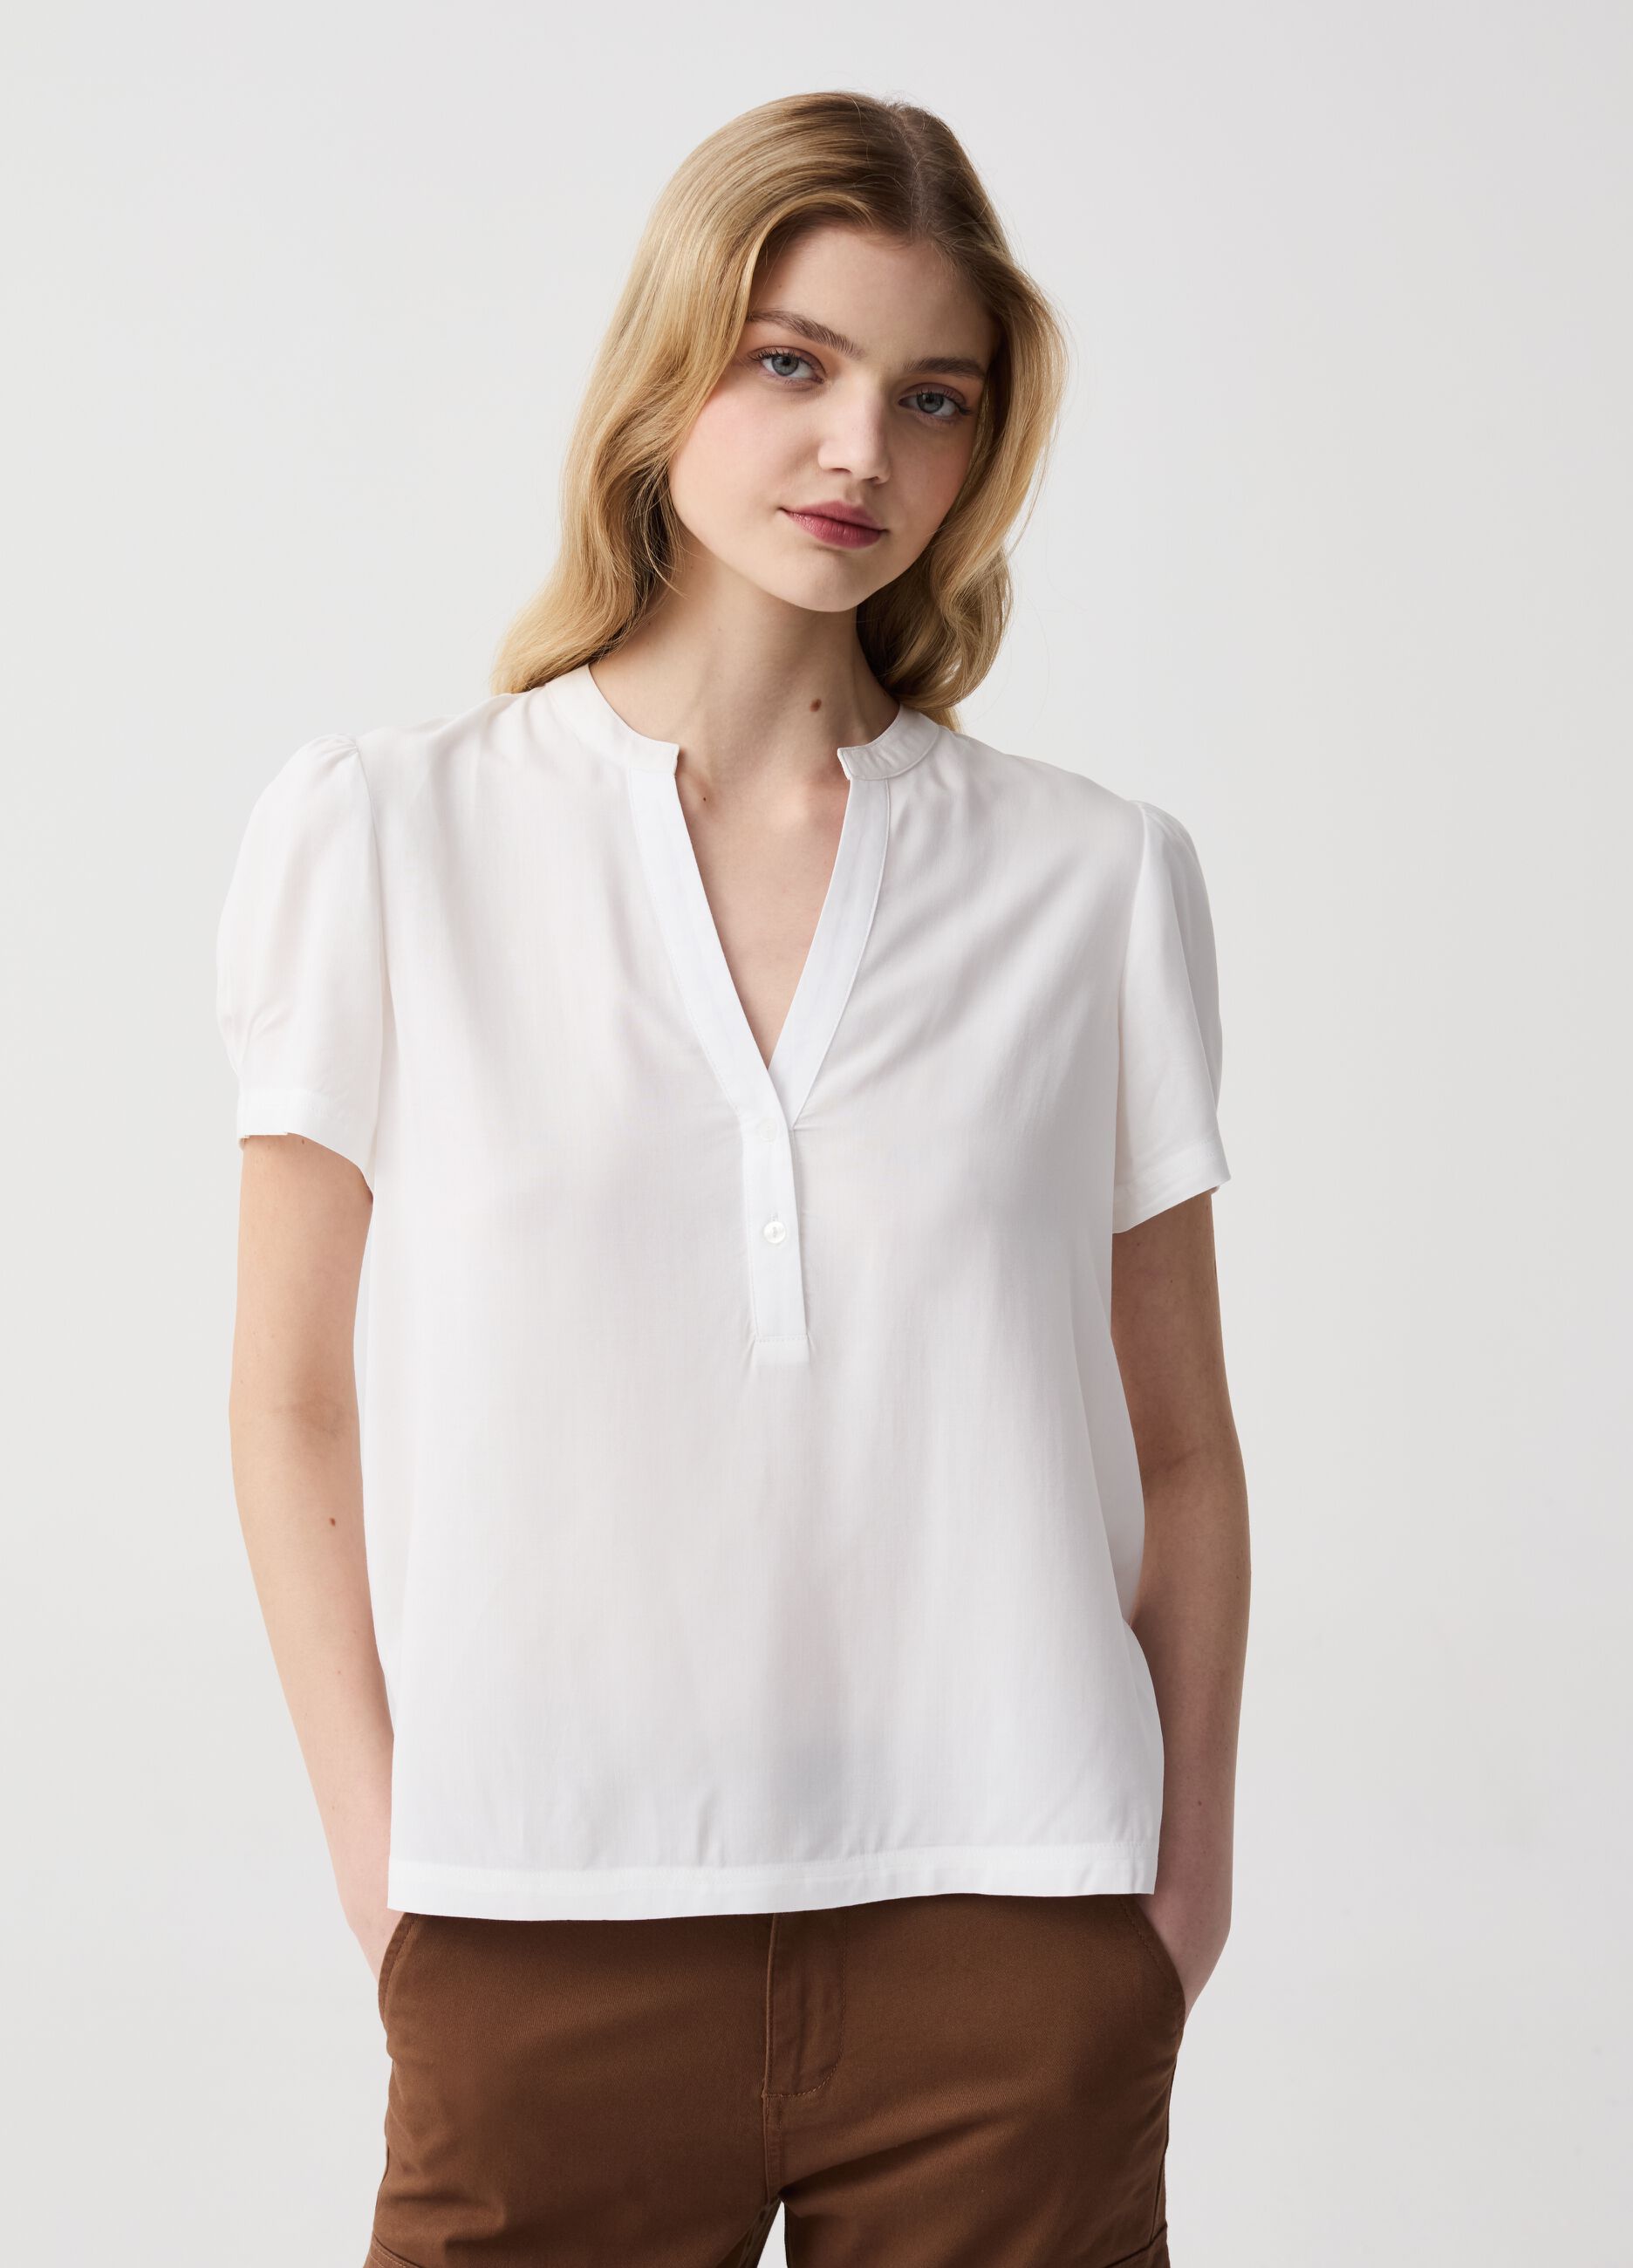 Blouse with short puff sleeves